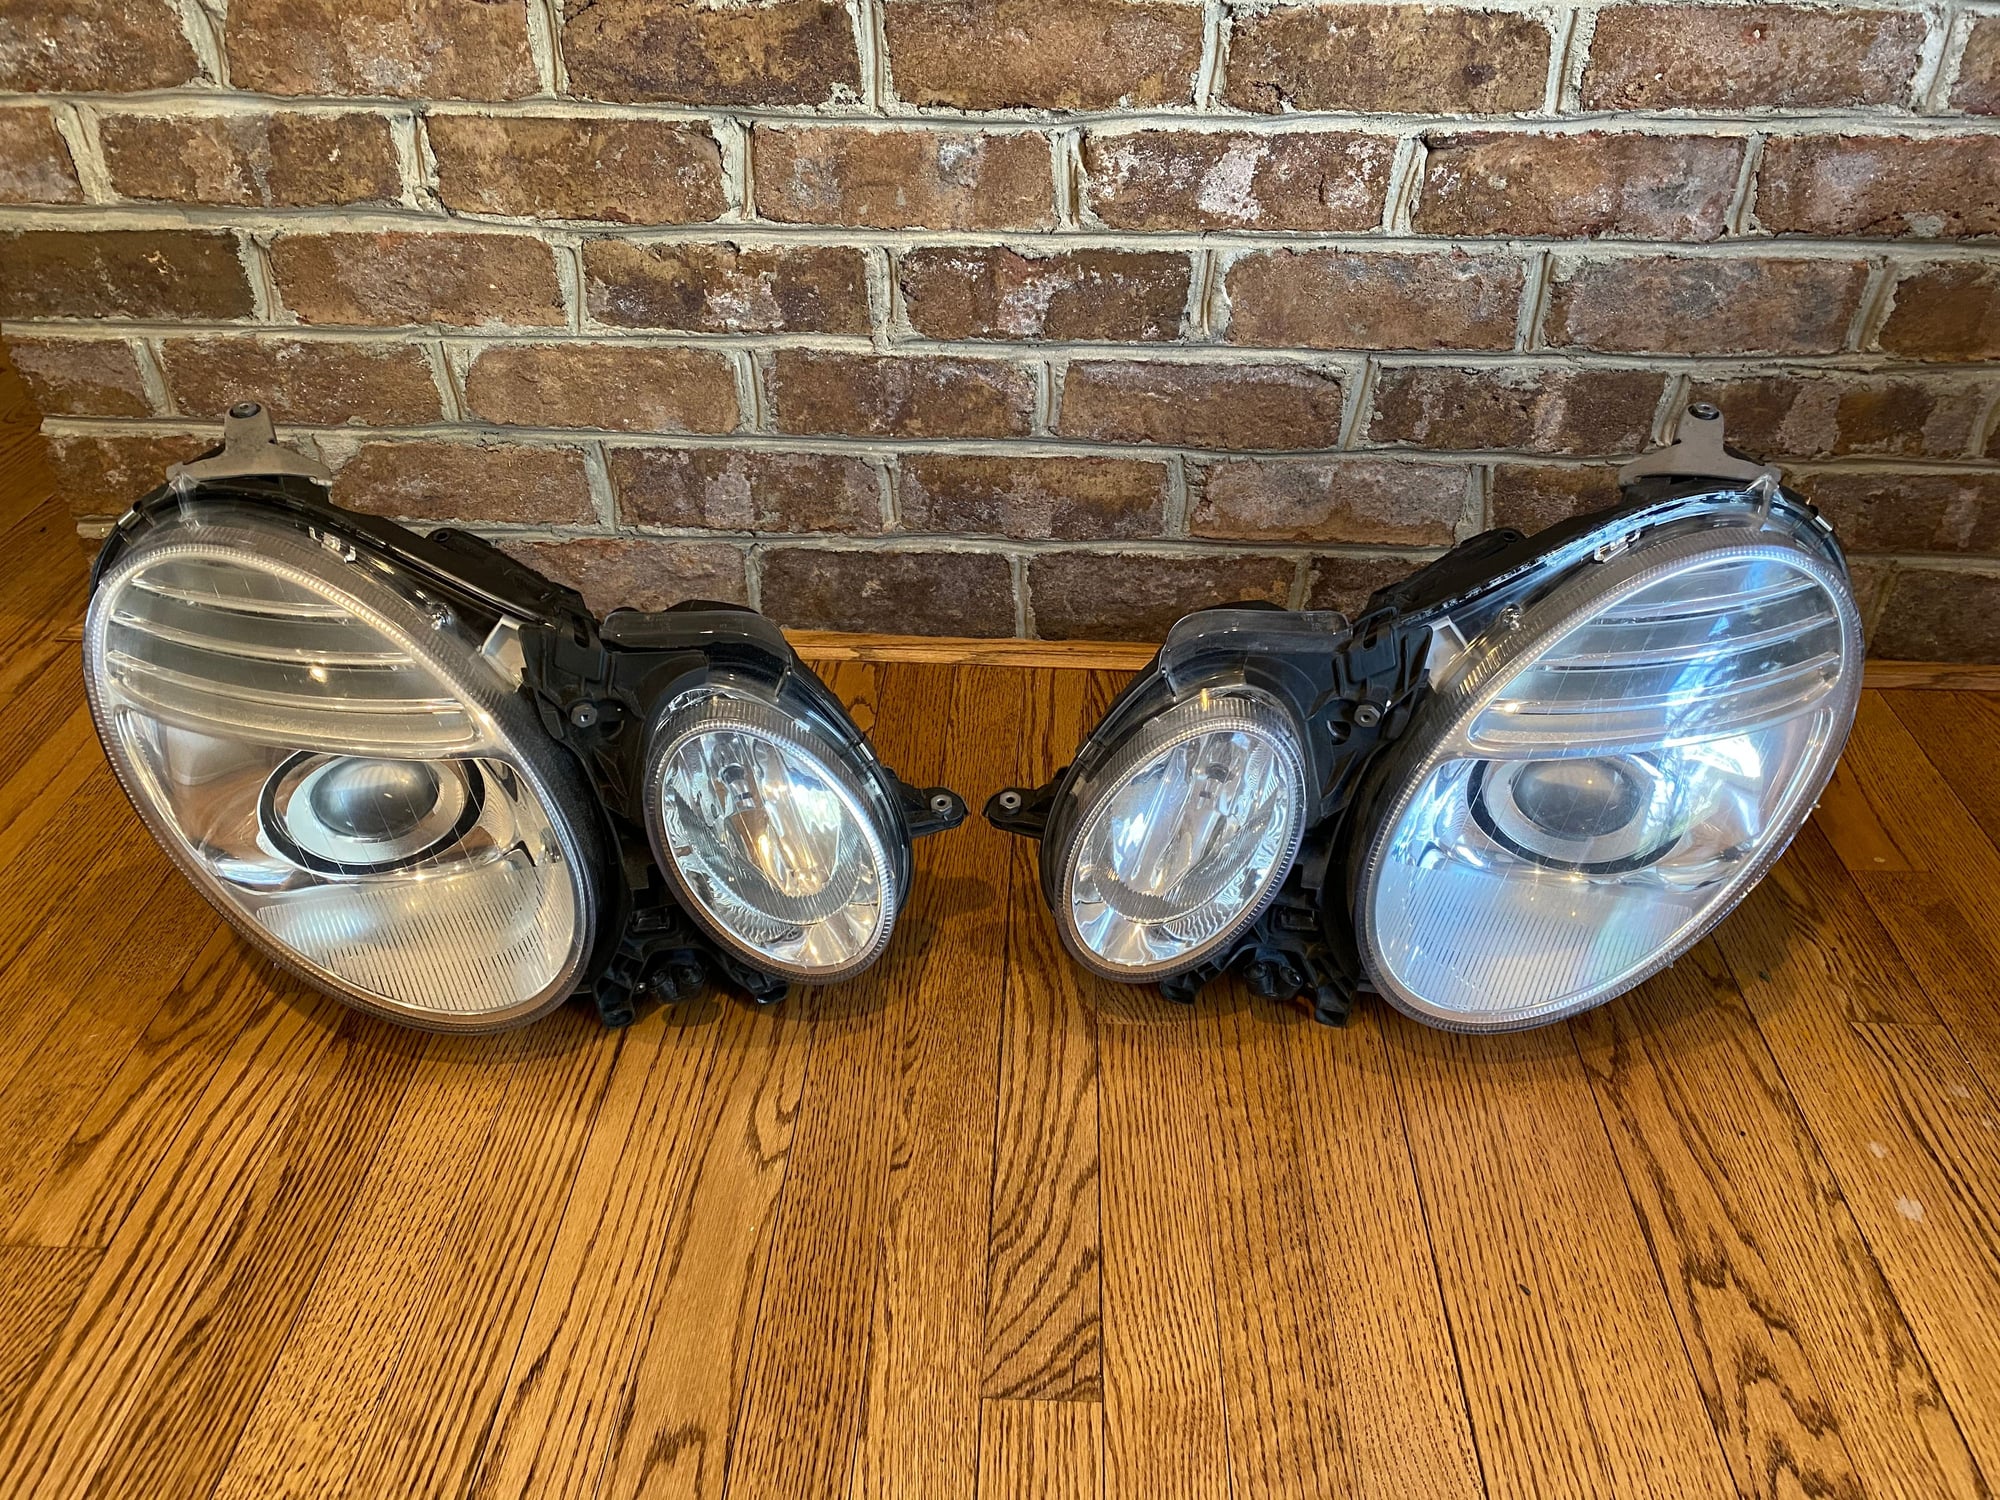 Lights - W211 Hella Bi-Xenon Projector Active Curve Headlights with Ballast Units and Washers - Used - 2004 to 2009 Mercedes-Benz E-Class - Great Falls, VA 22066, United States